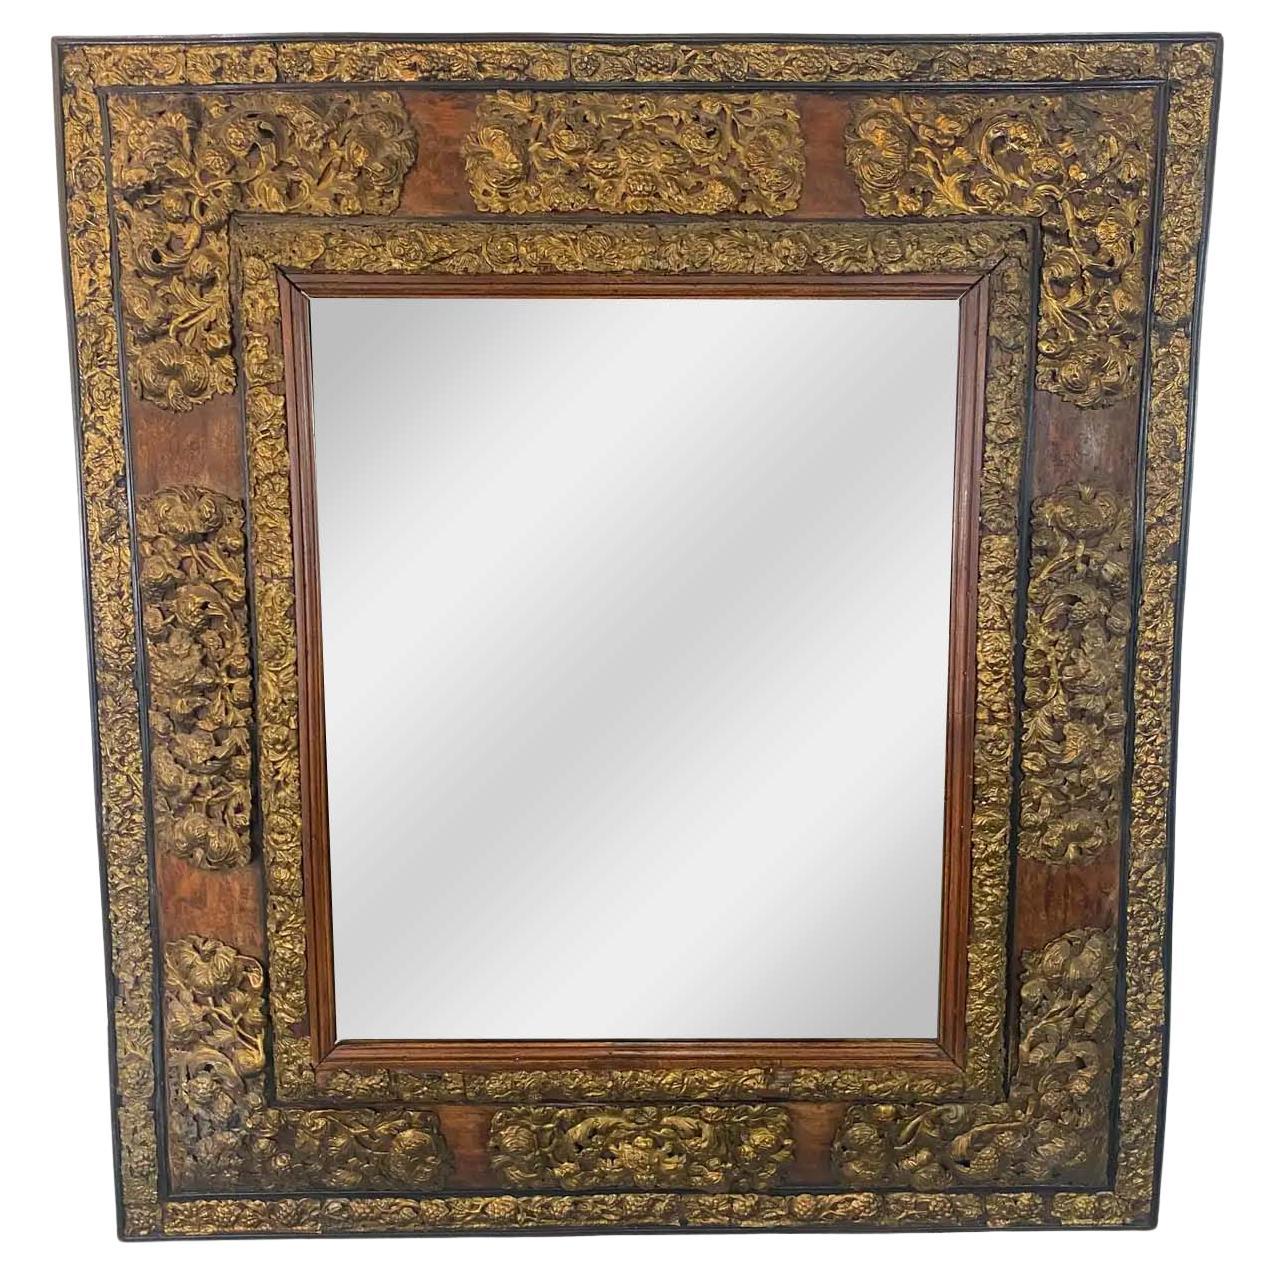 19th Century Art Nouveau Gold Foil on Wood Mantel or Wall Mirror For Sale